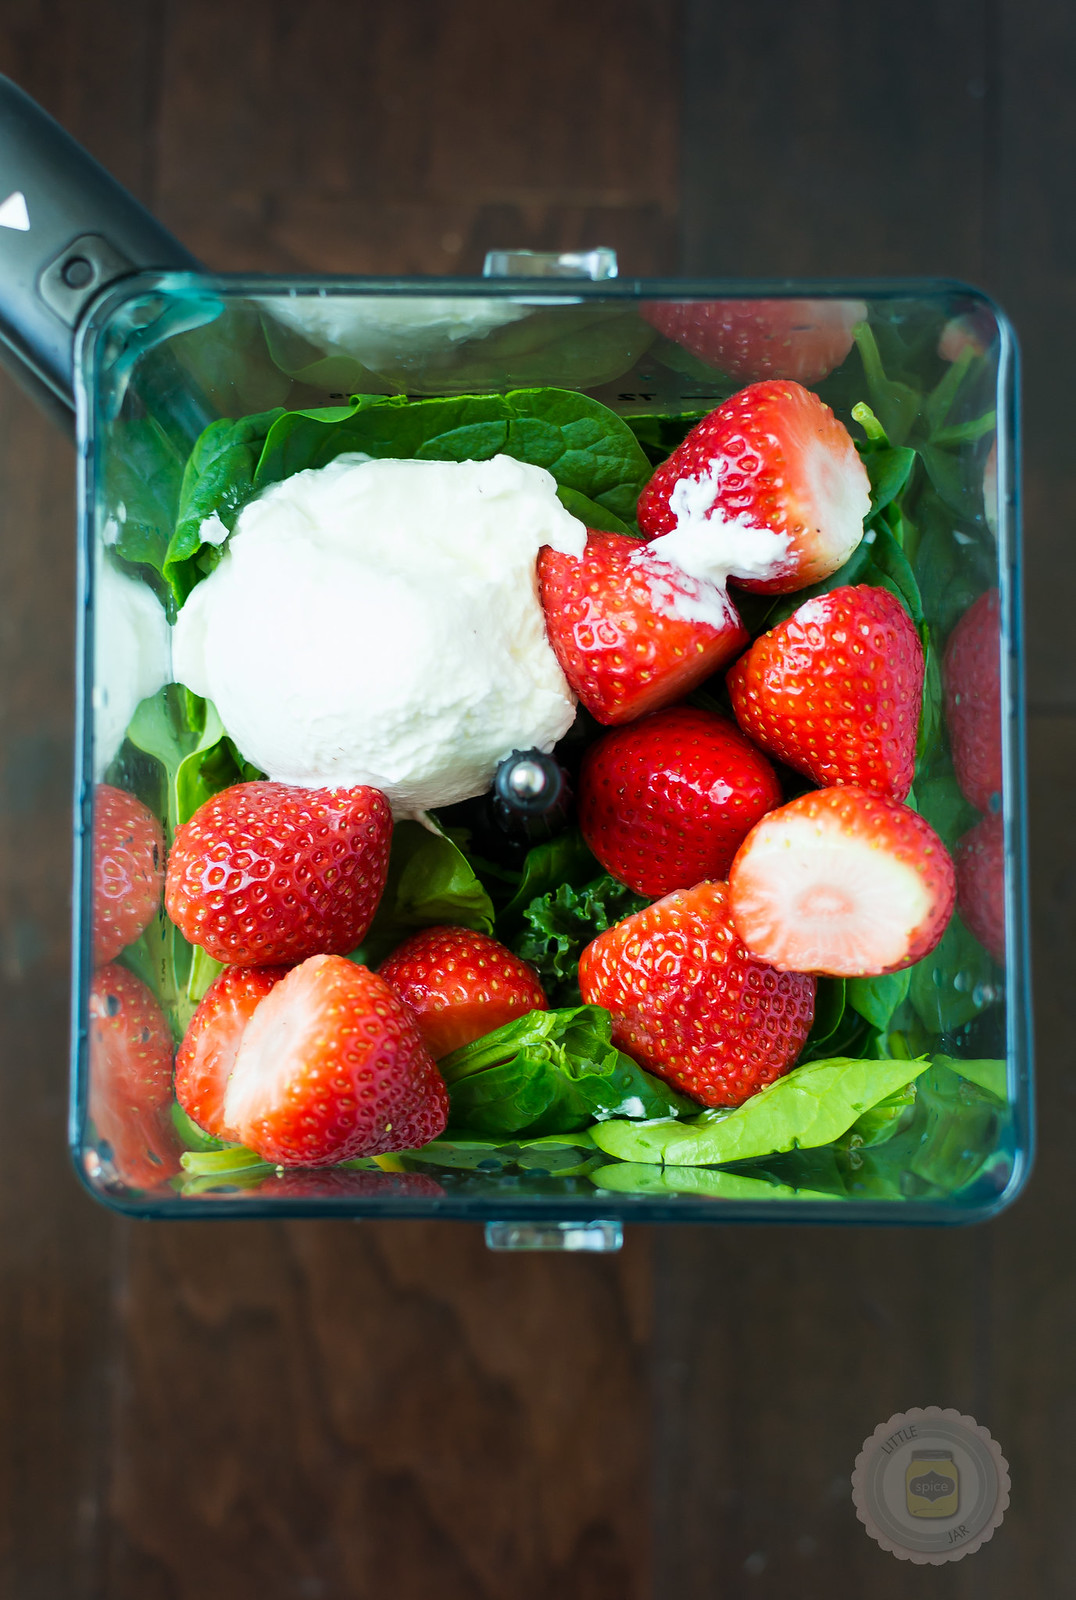 Strawberry Kale and Spinach Detox Smoothie Ingredients in Blender